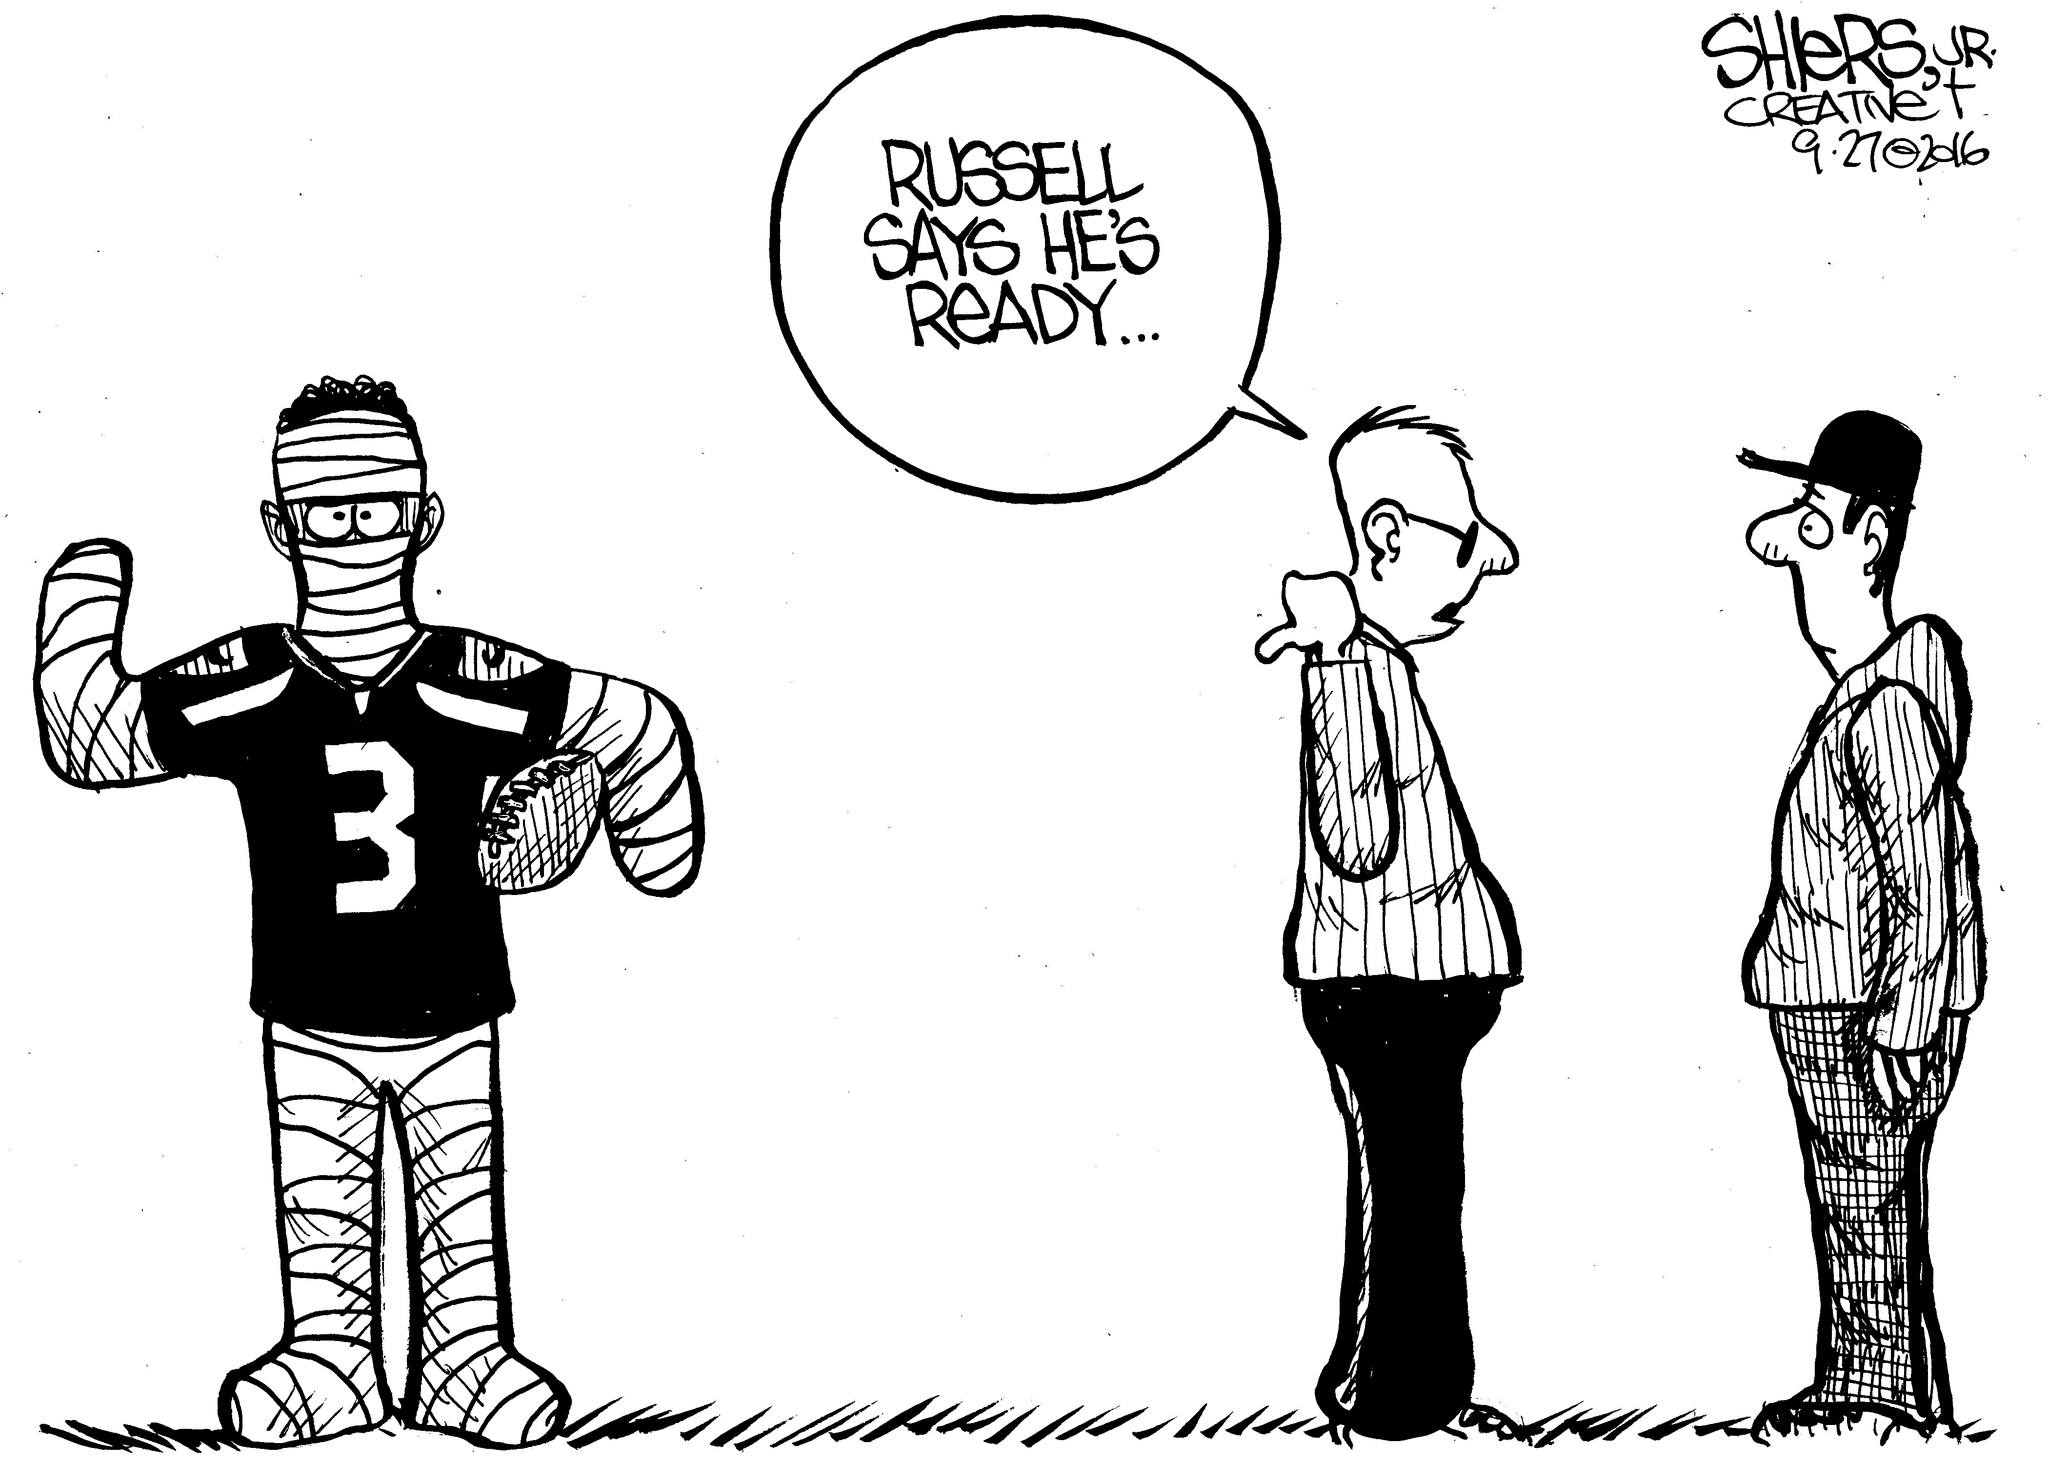 Russel Wilson says he can play | Cartoon for Sept. 28 - Frank Shiers